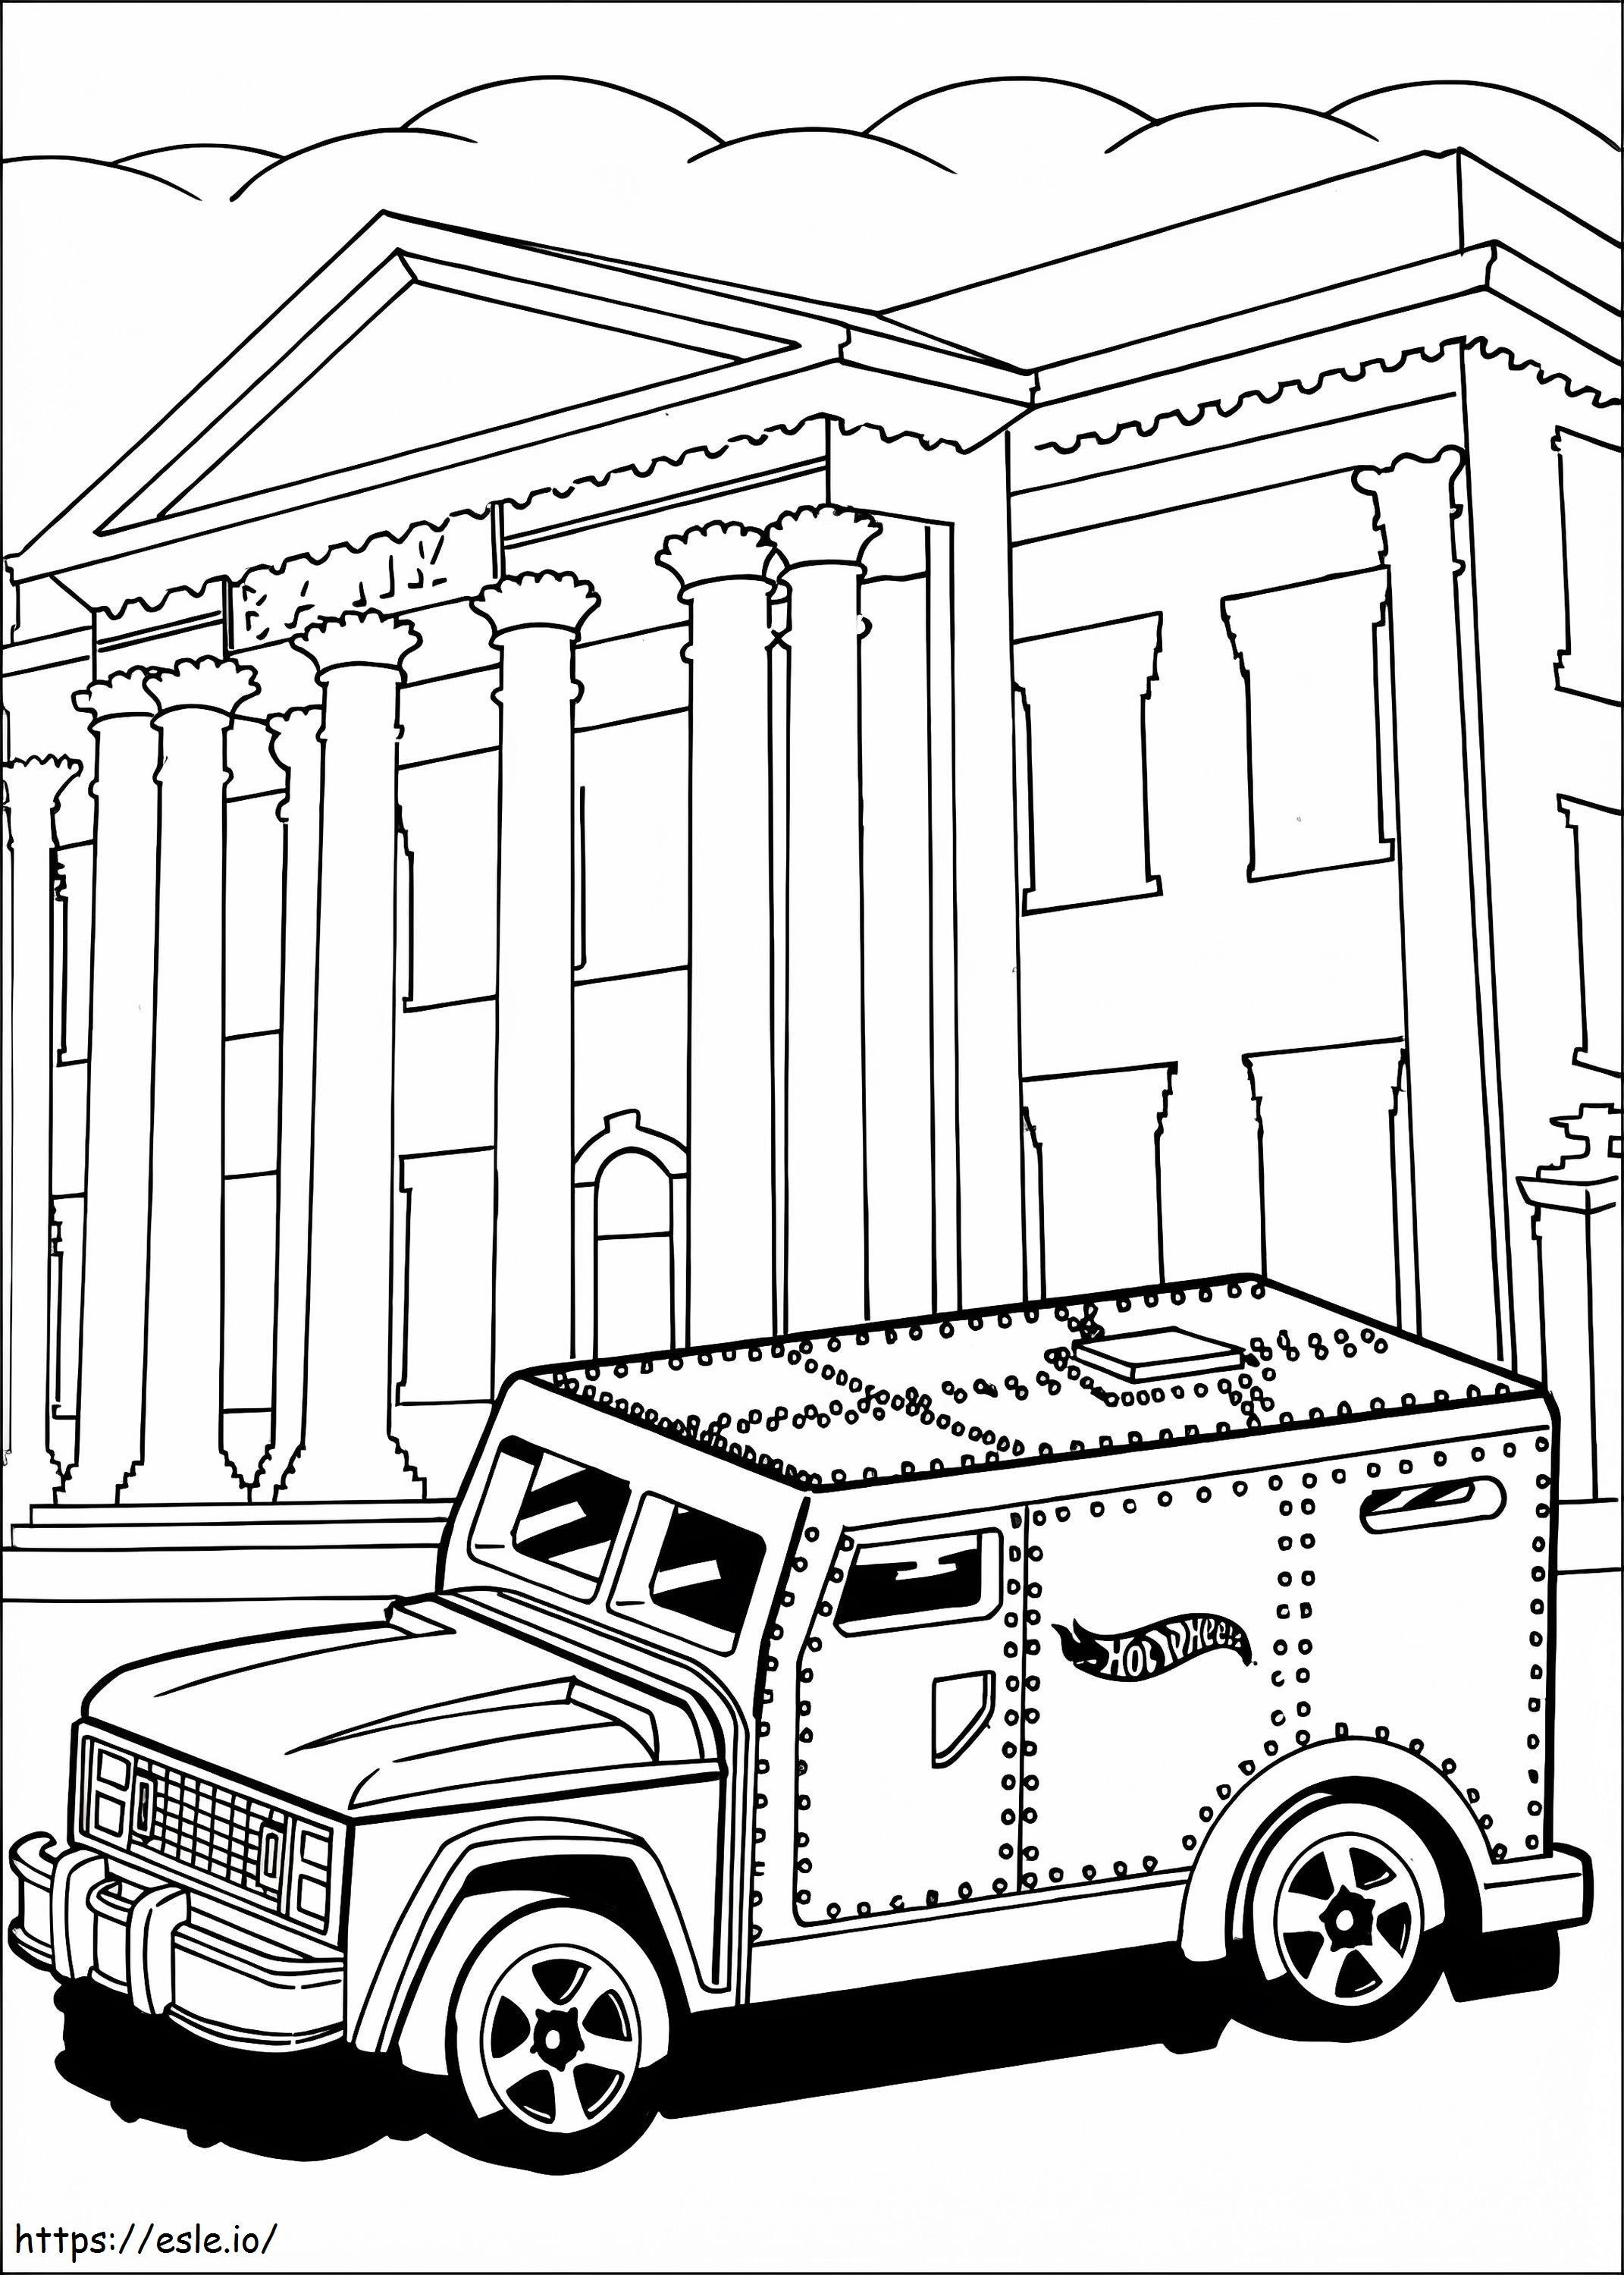 Bank Building coloring page